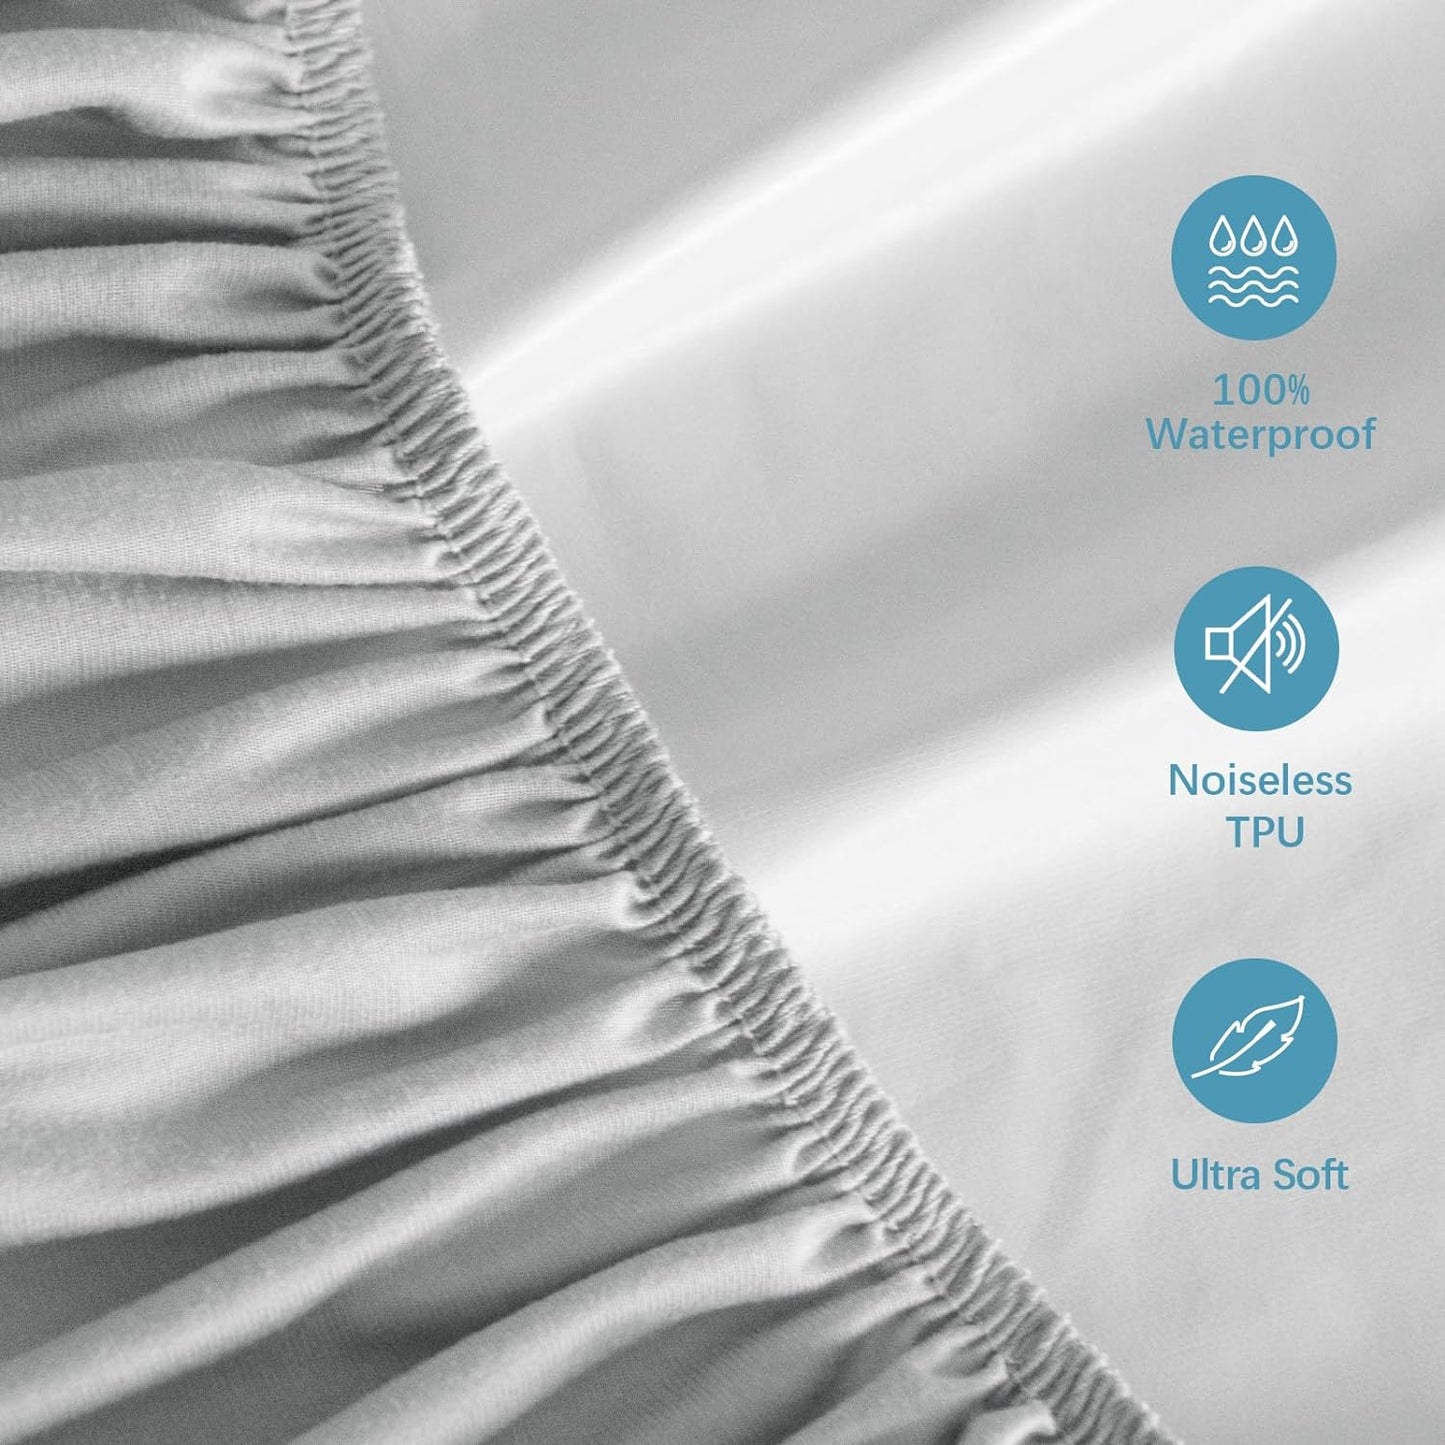 Waterproof Mattress Protector Twin & Full Size, 2 Pack, Noiseless & Soft Mattress Cover with Deep Pocket Up to 14" Depth, Super Breathable & Easy Wash, Grey